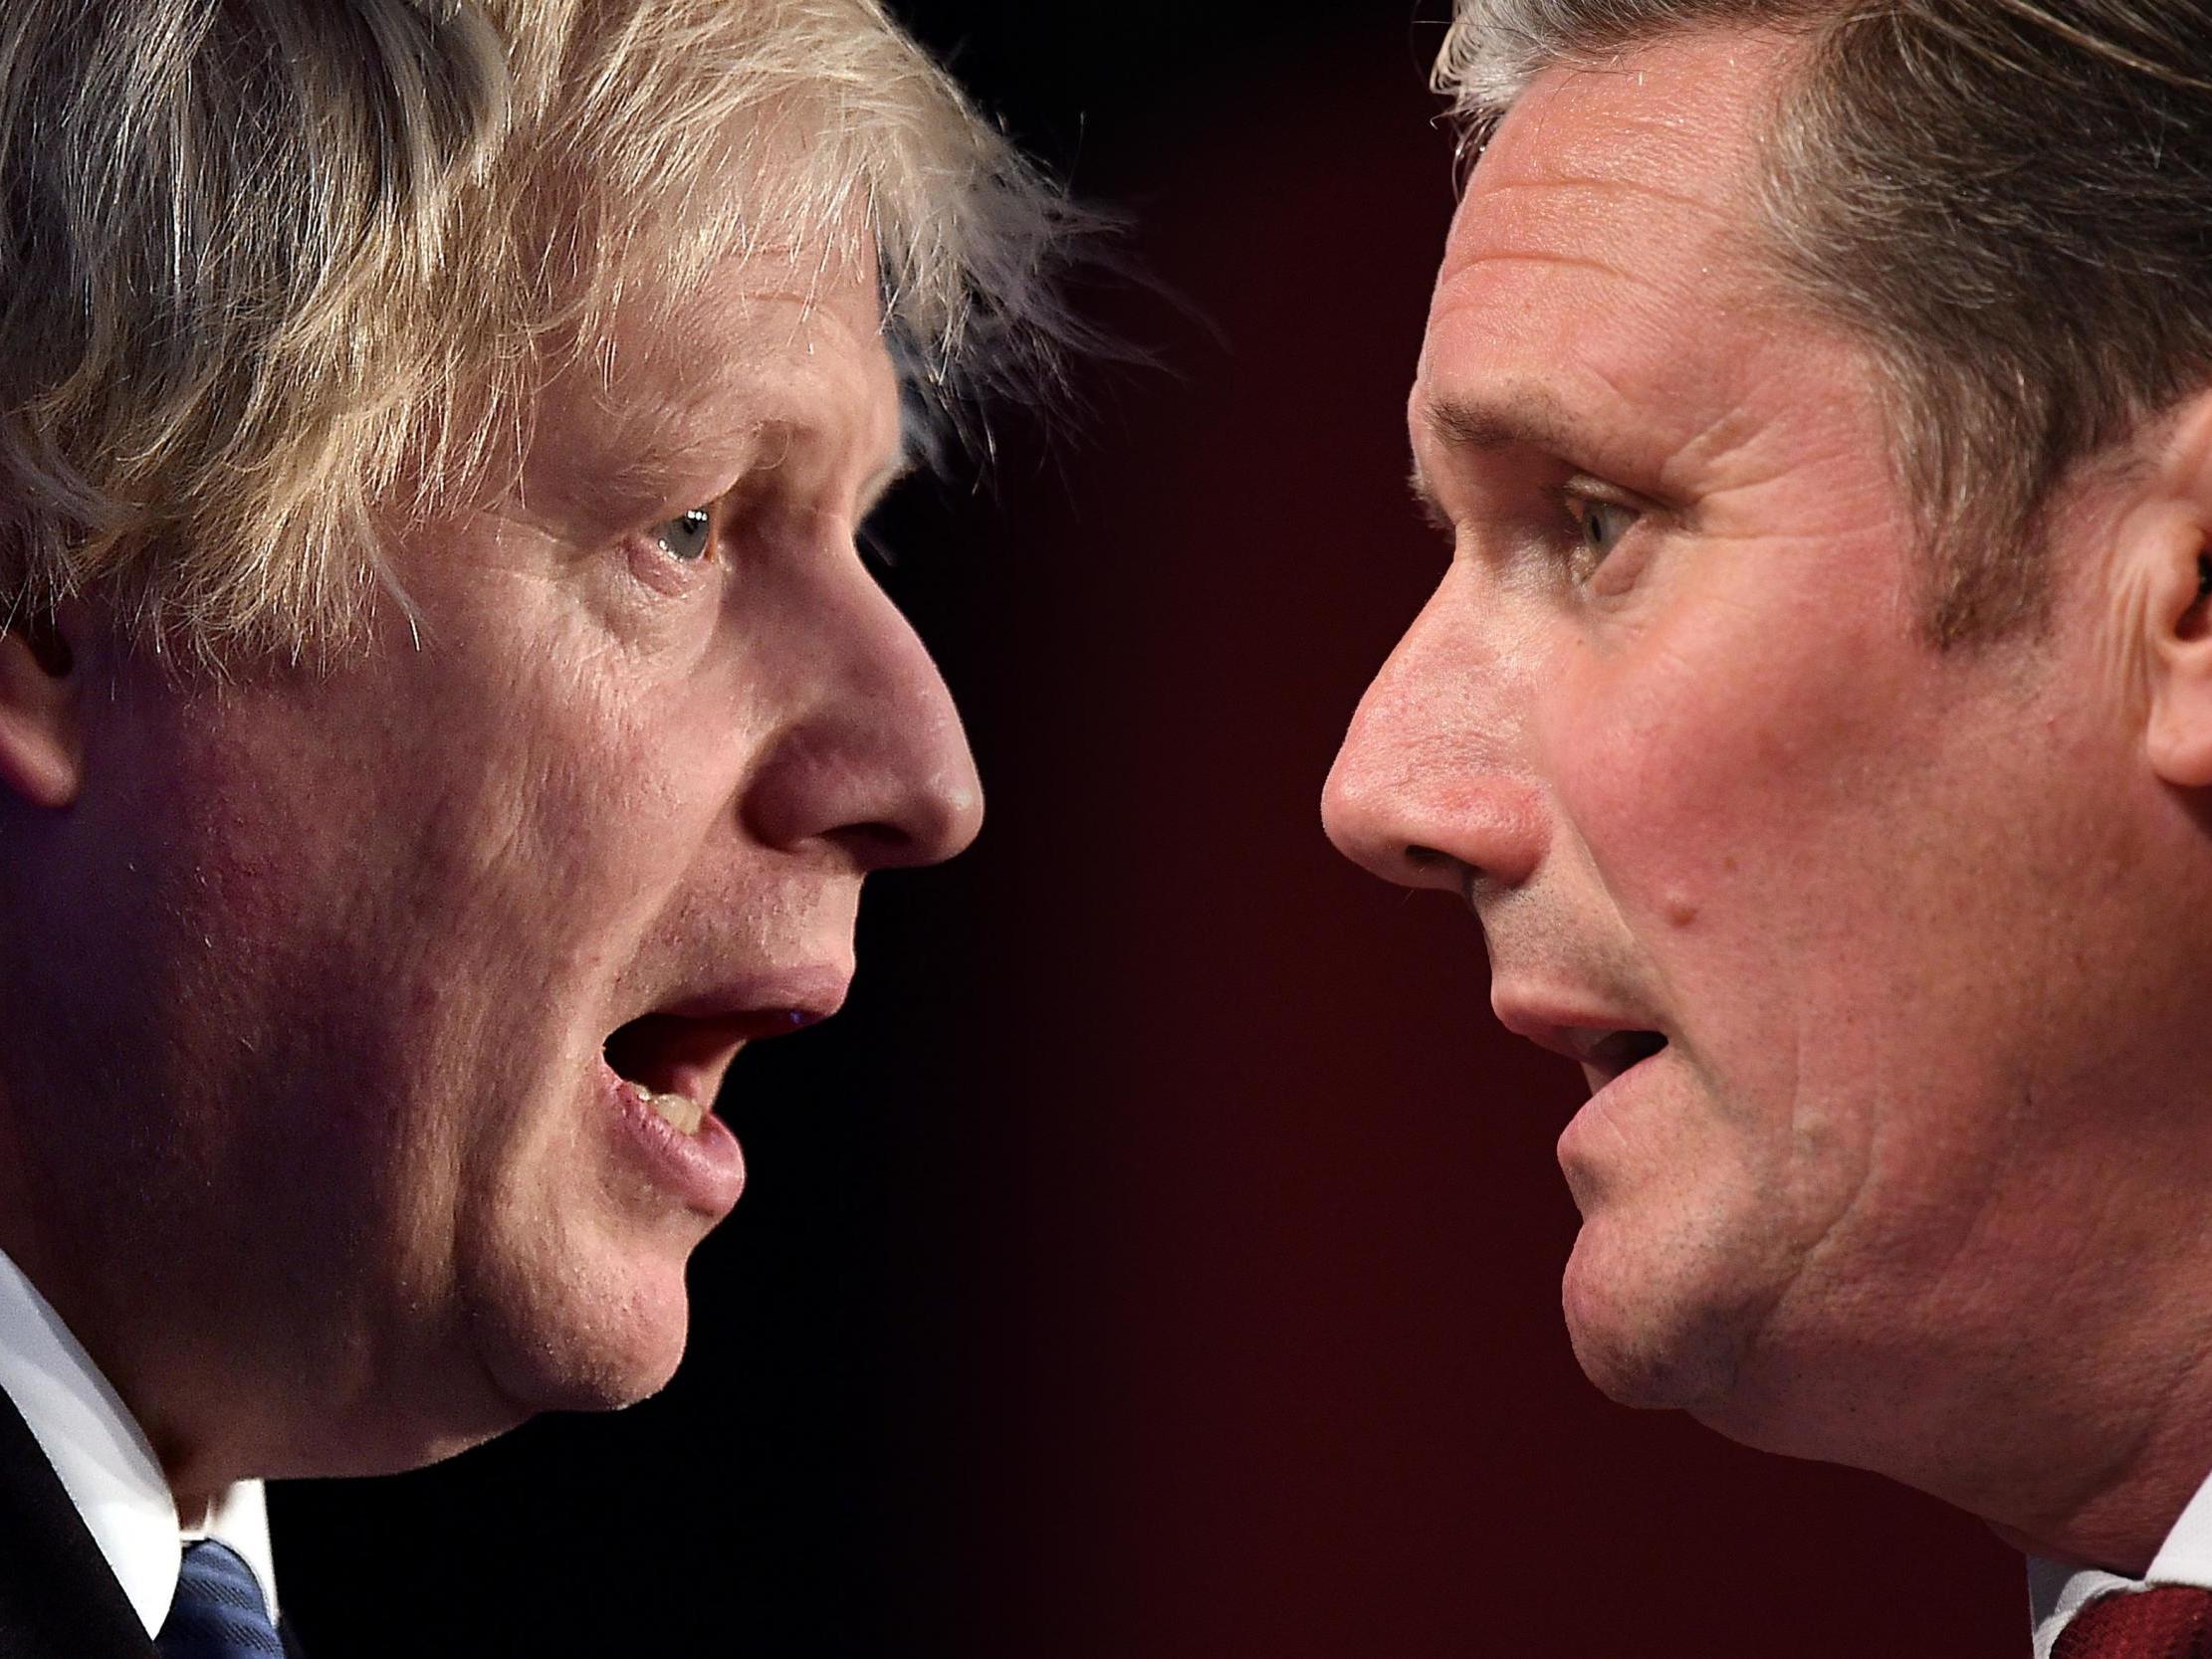 Related video: Keir Starmer accuses Boris Johnson of giving ‘dodgy answers’ on child poverty claim